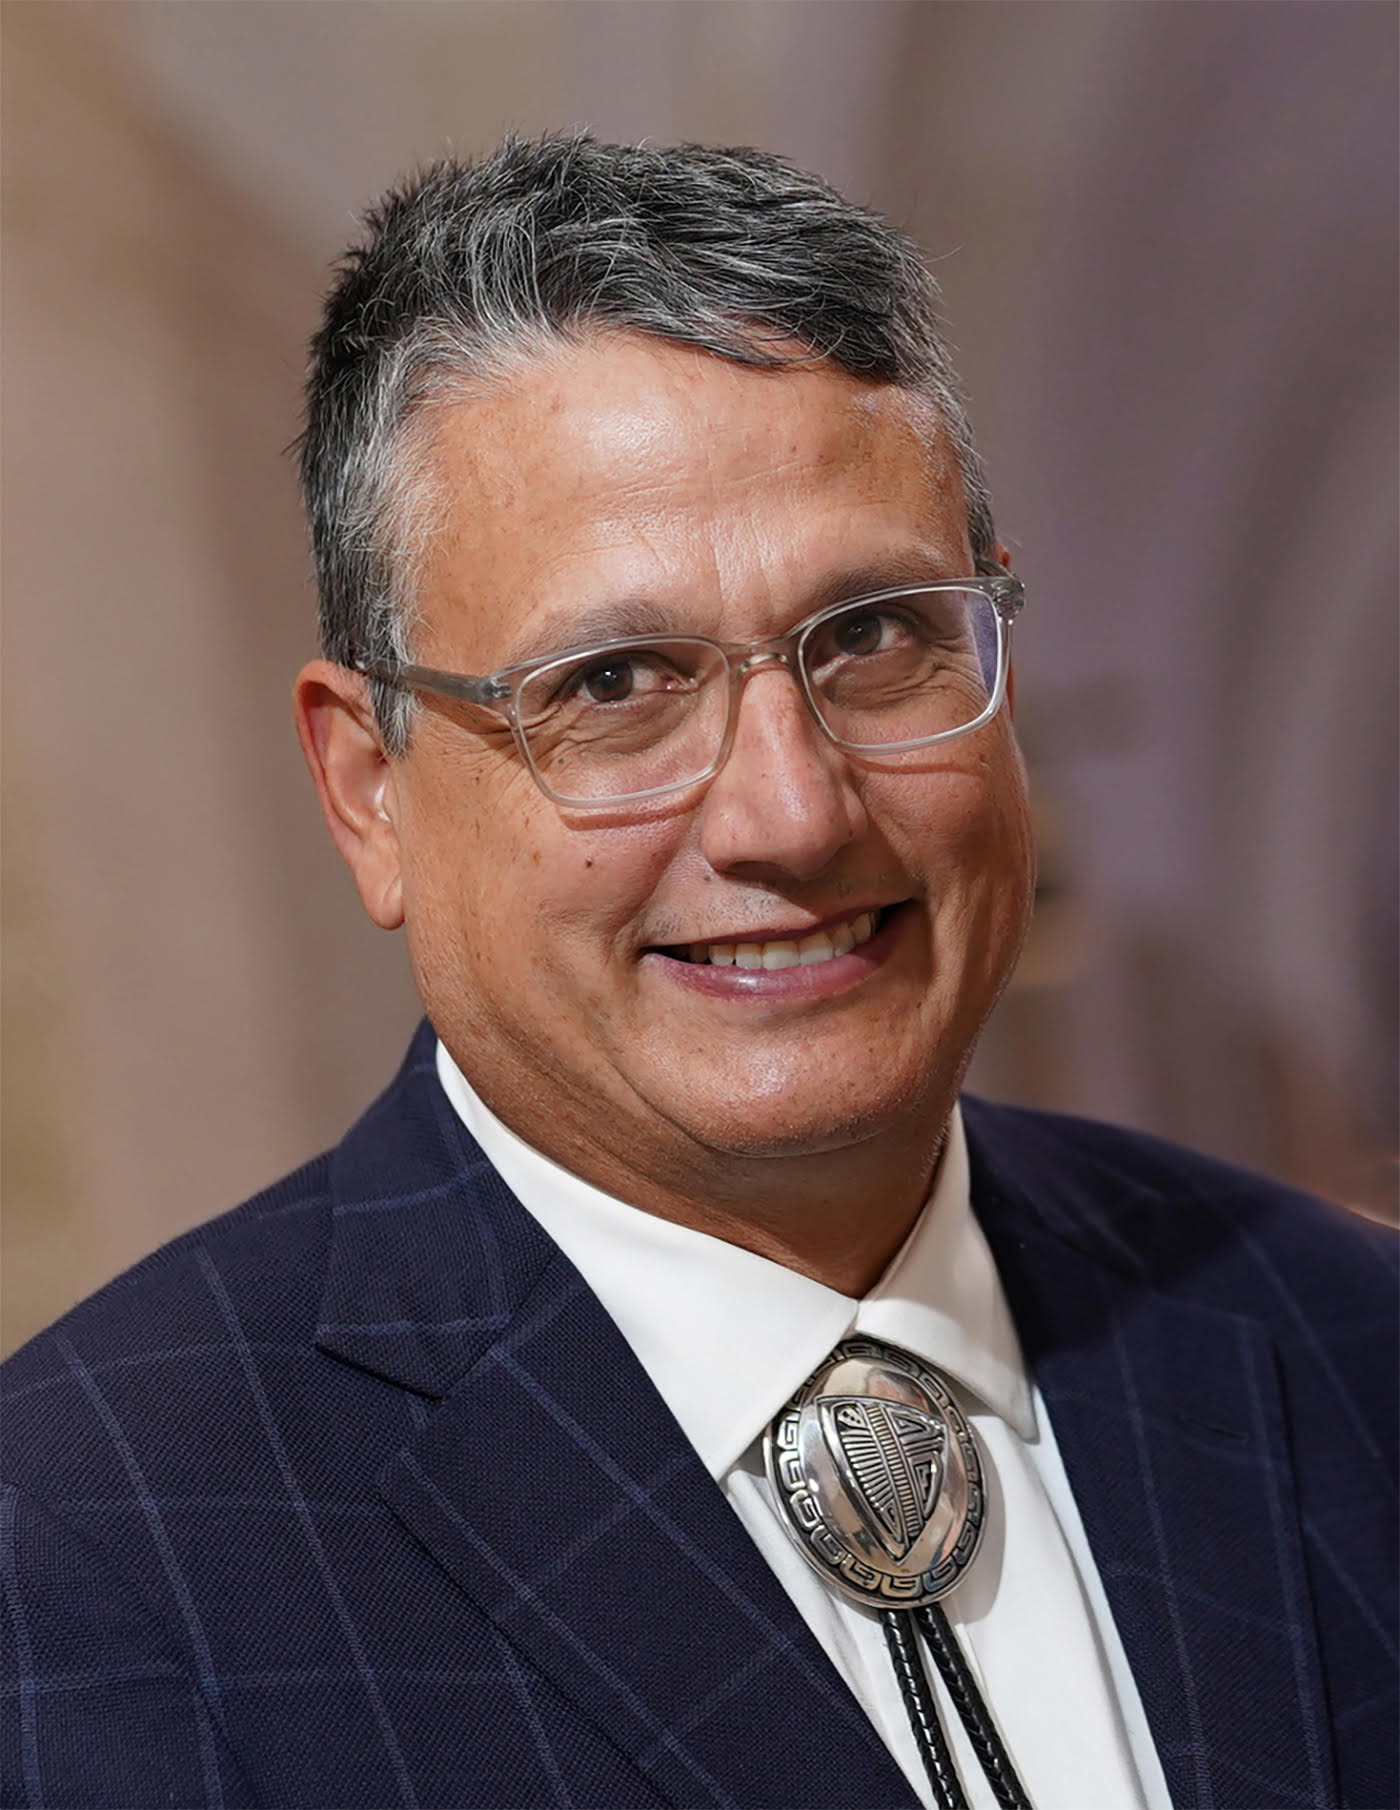 Gov. Evers Appoints Judge Pedro Colón to the Court of Appeals – District I